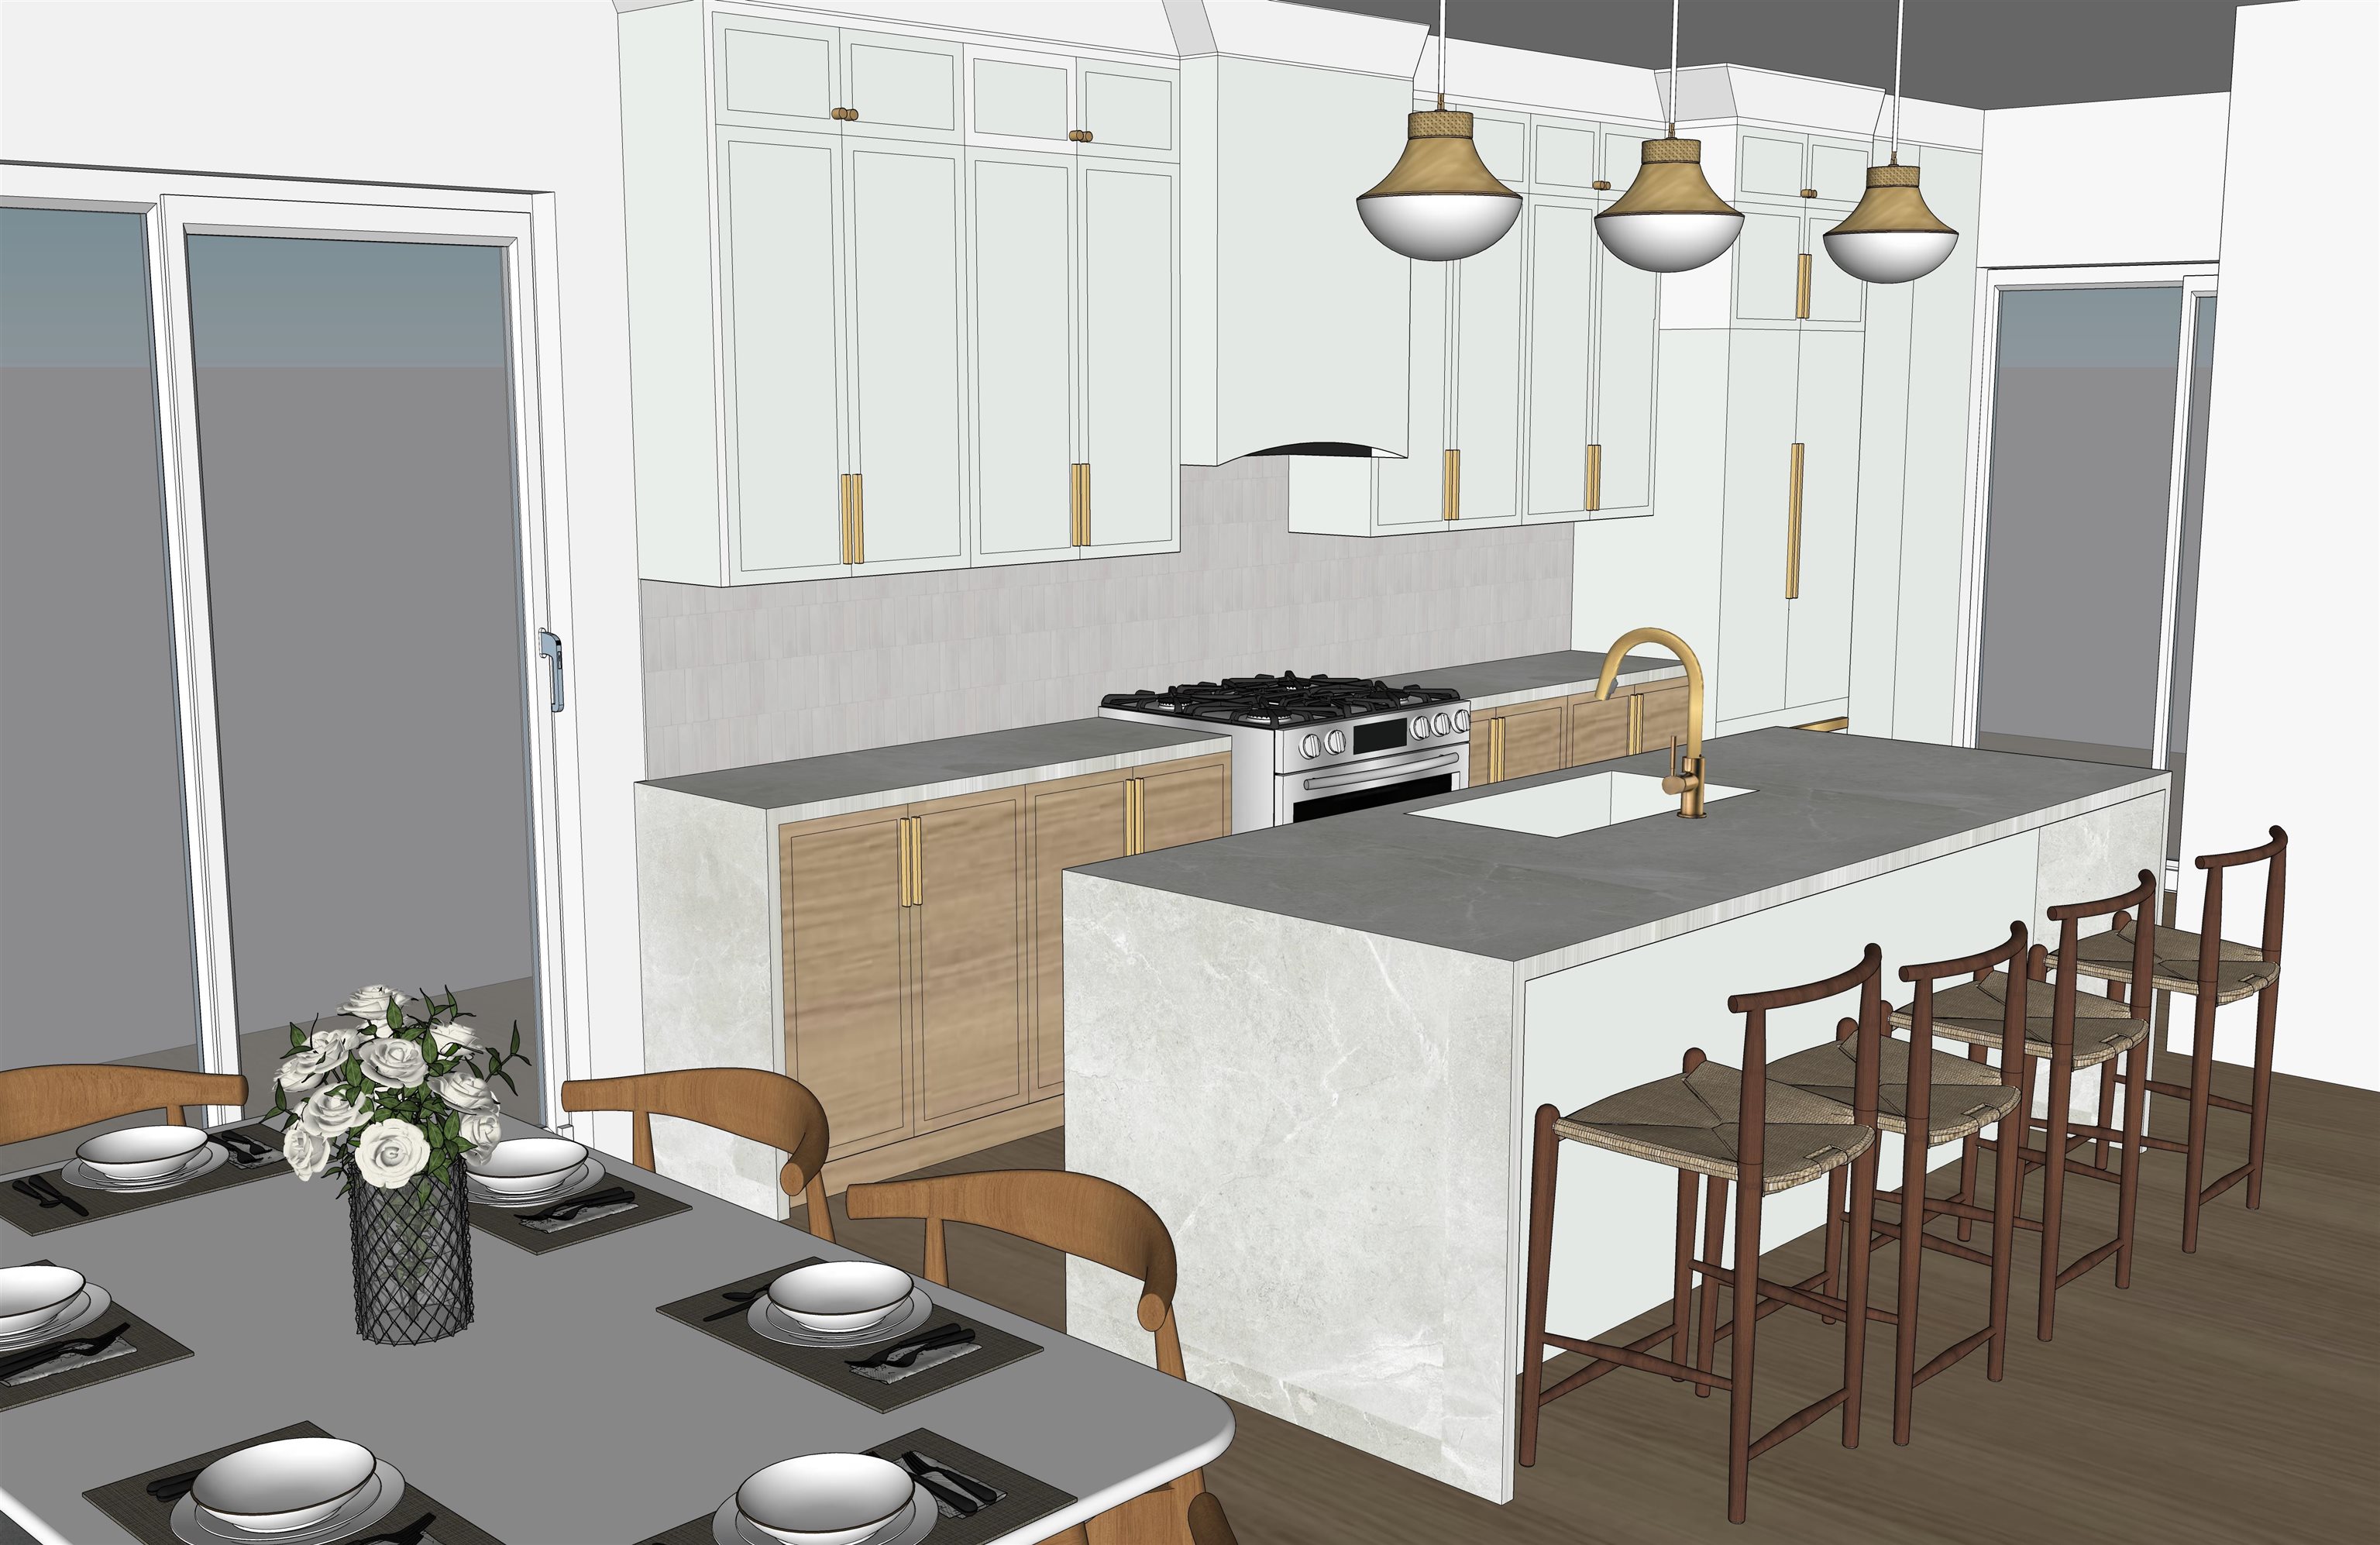 Concept of redesigned kitchen